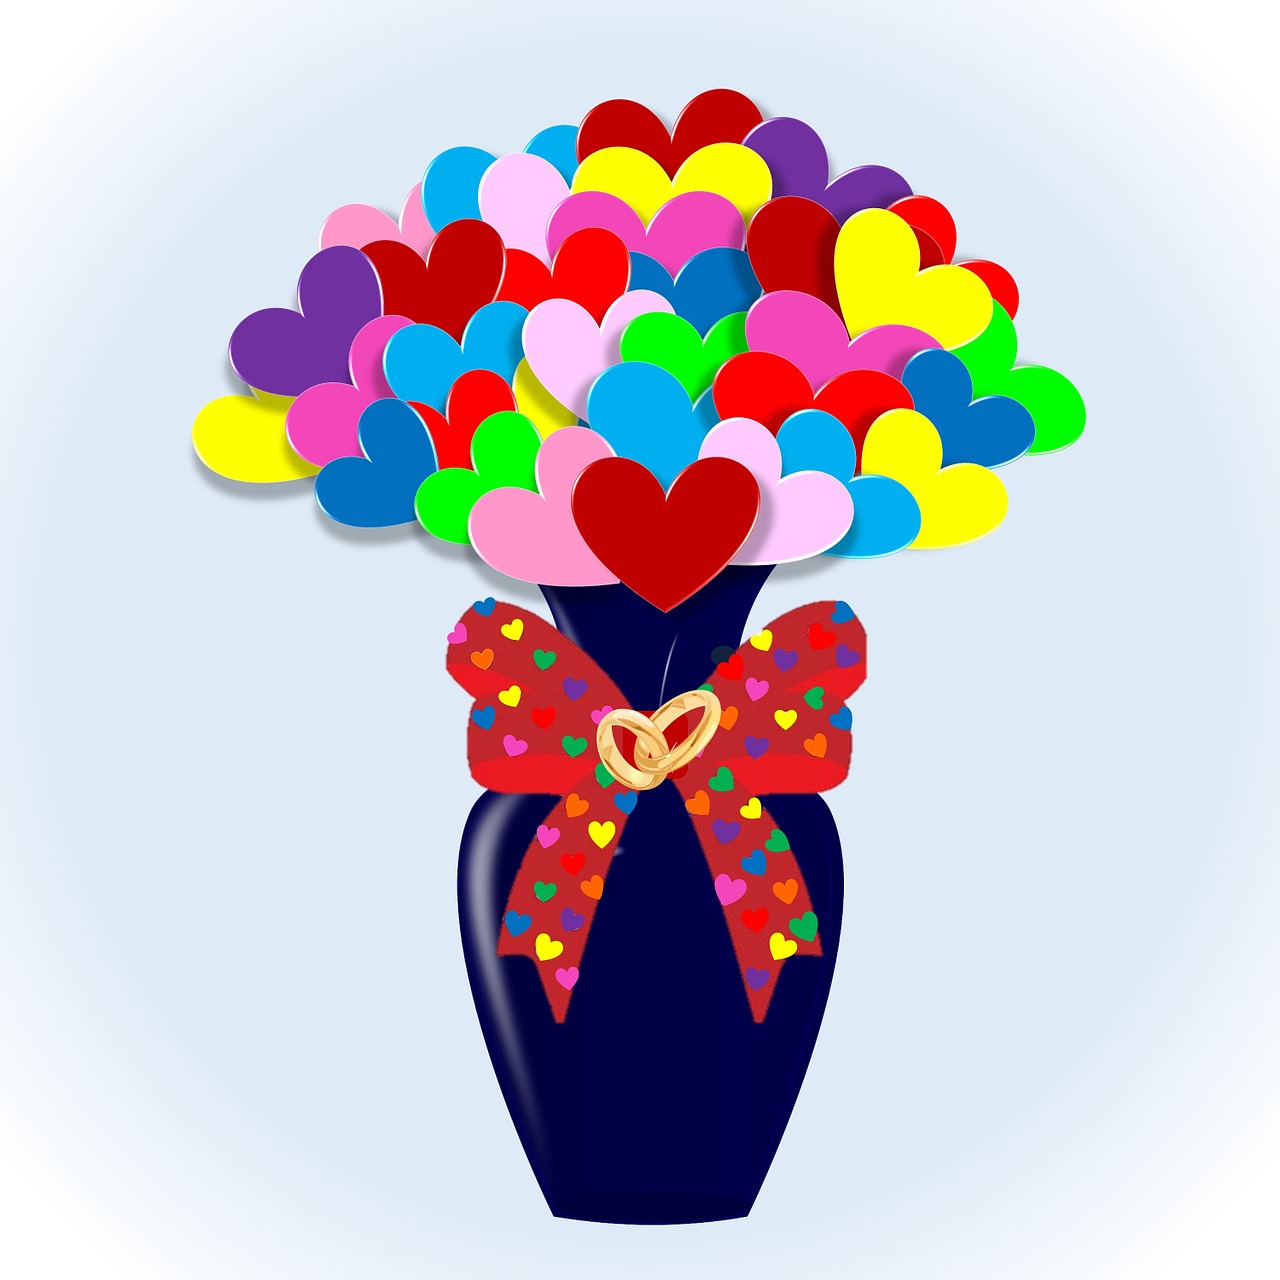 marriage equality bouquet free photo